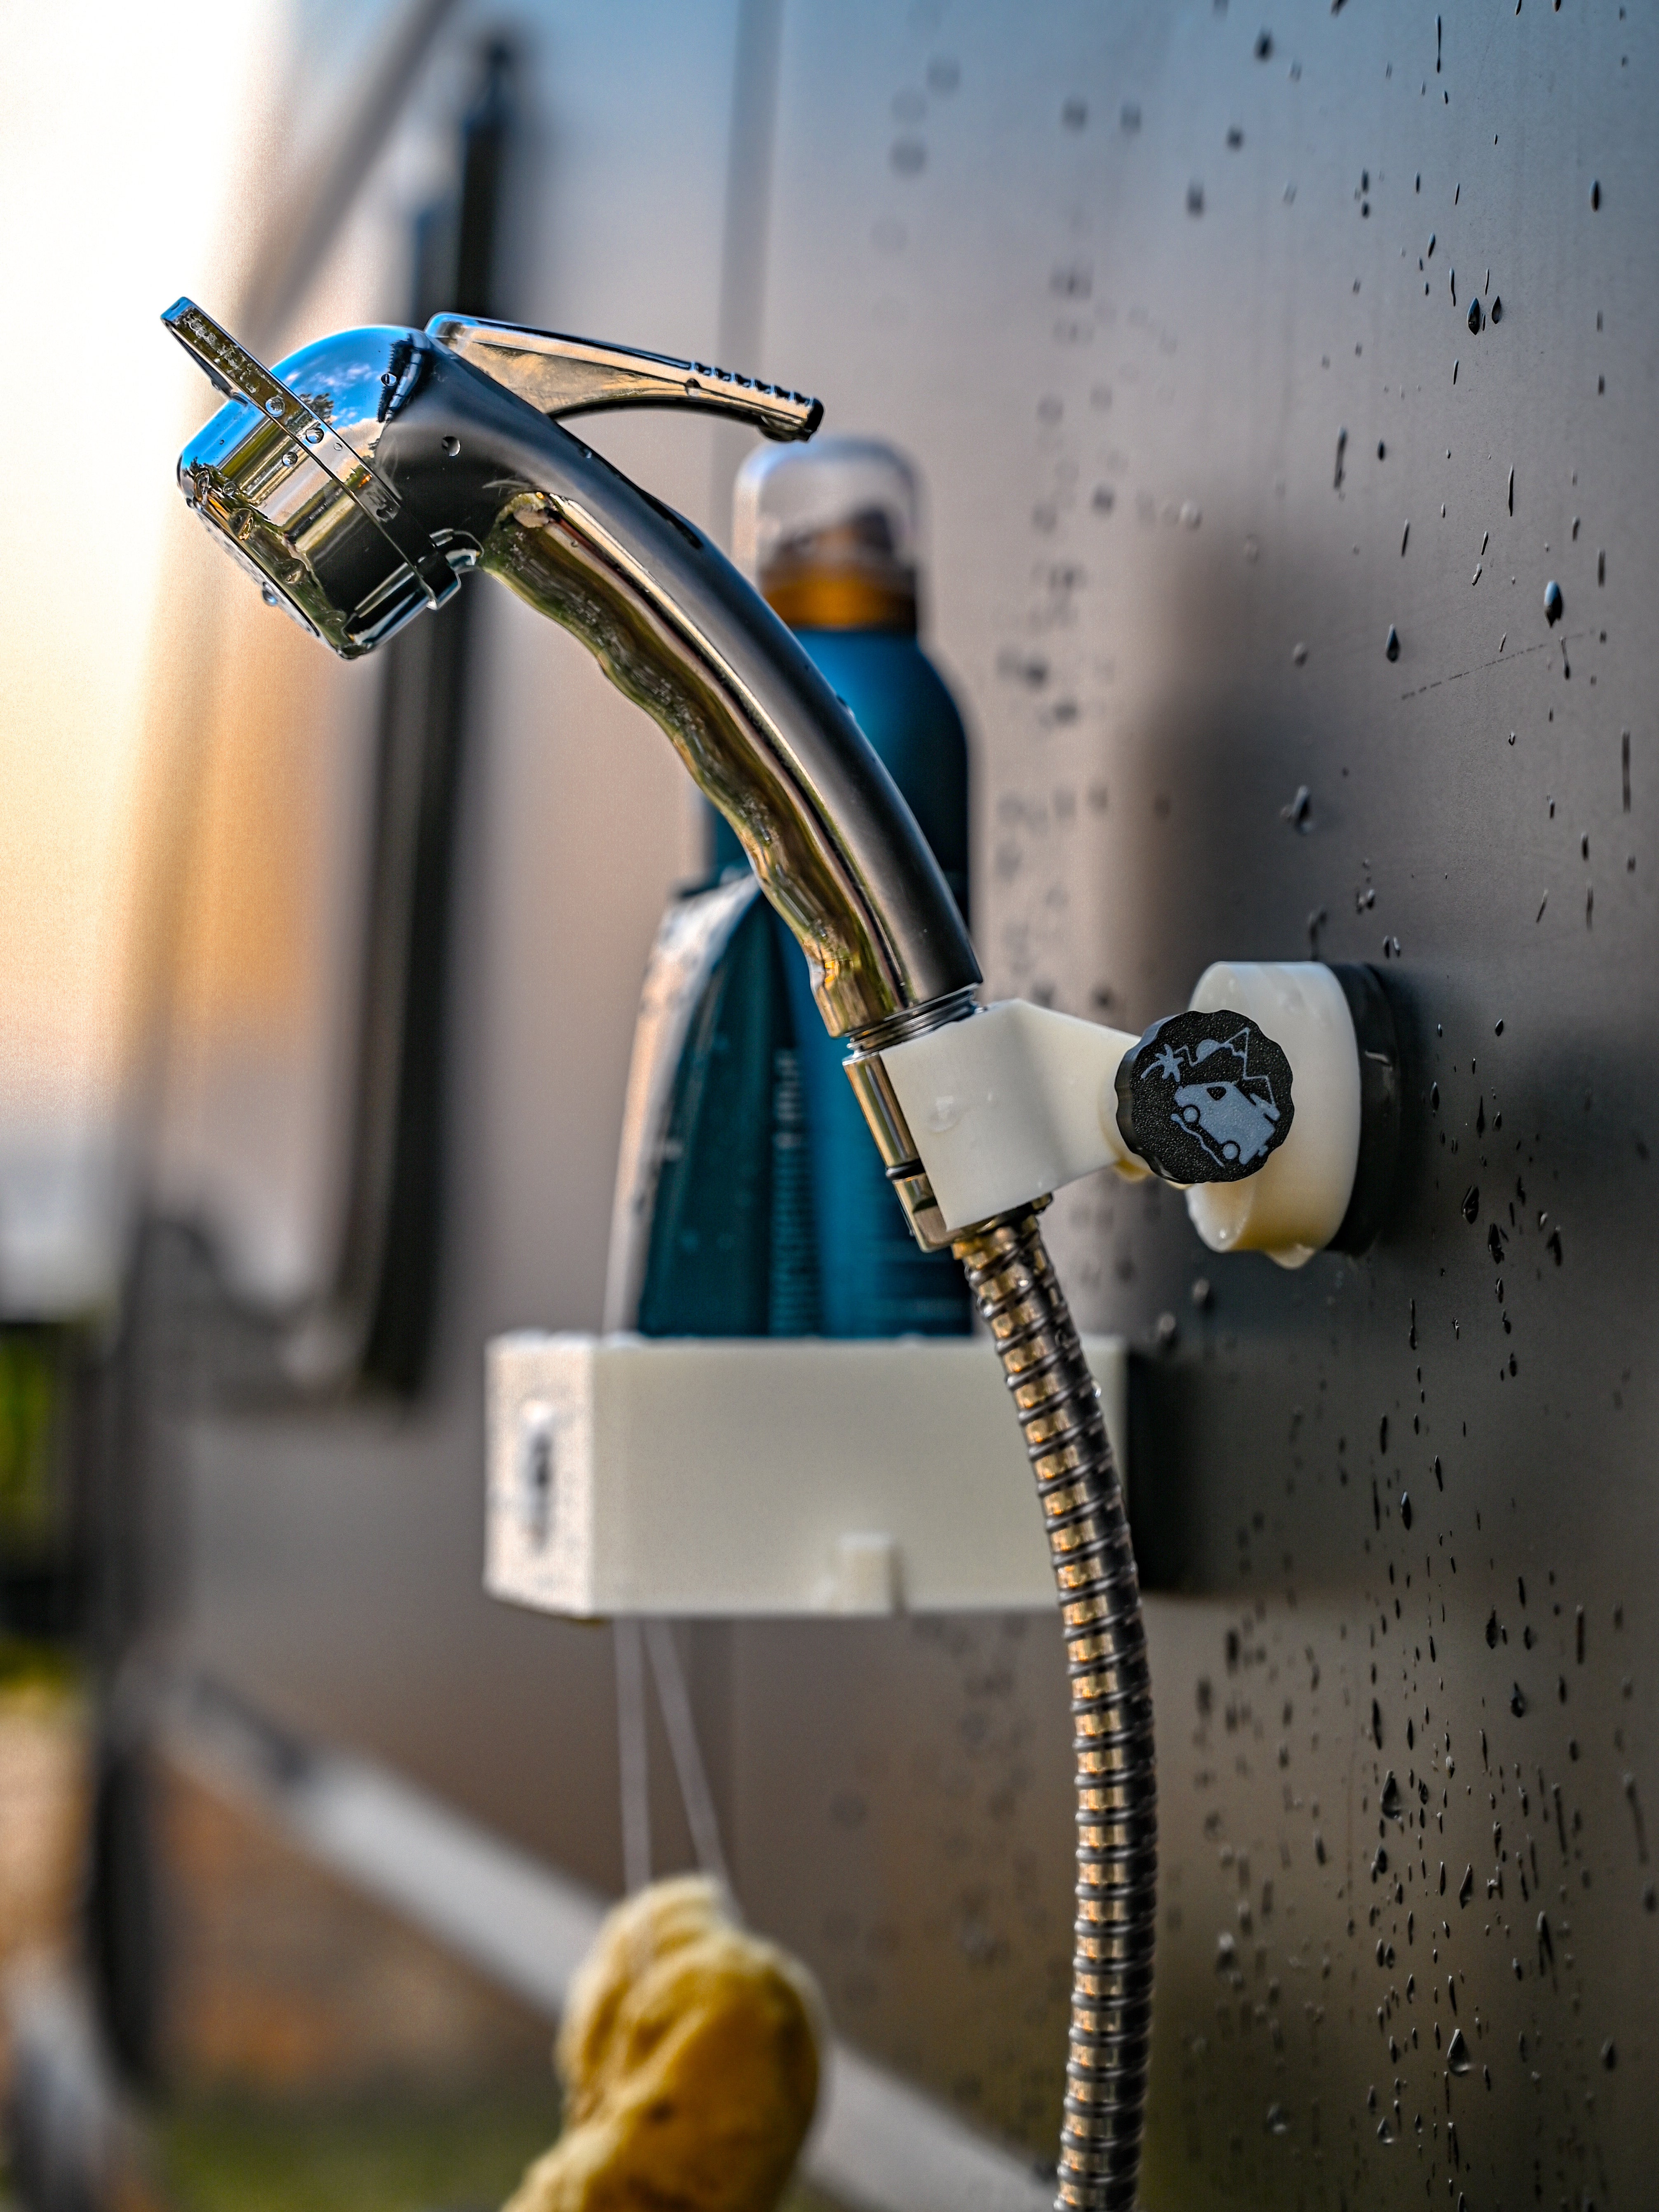 The Shower Holder Magnetic - Offrotie 3D Printed - Portable for Vanlife